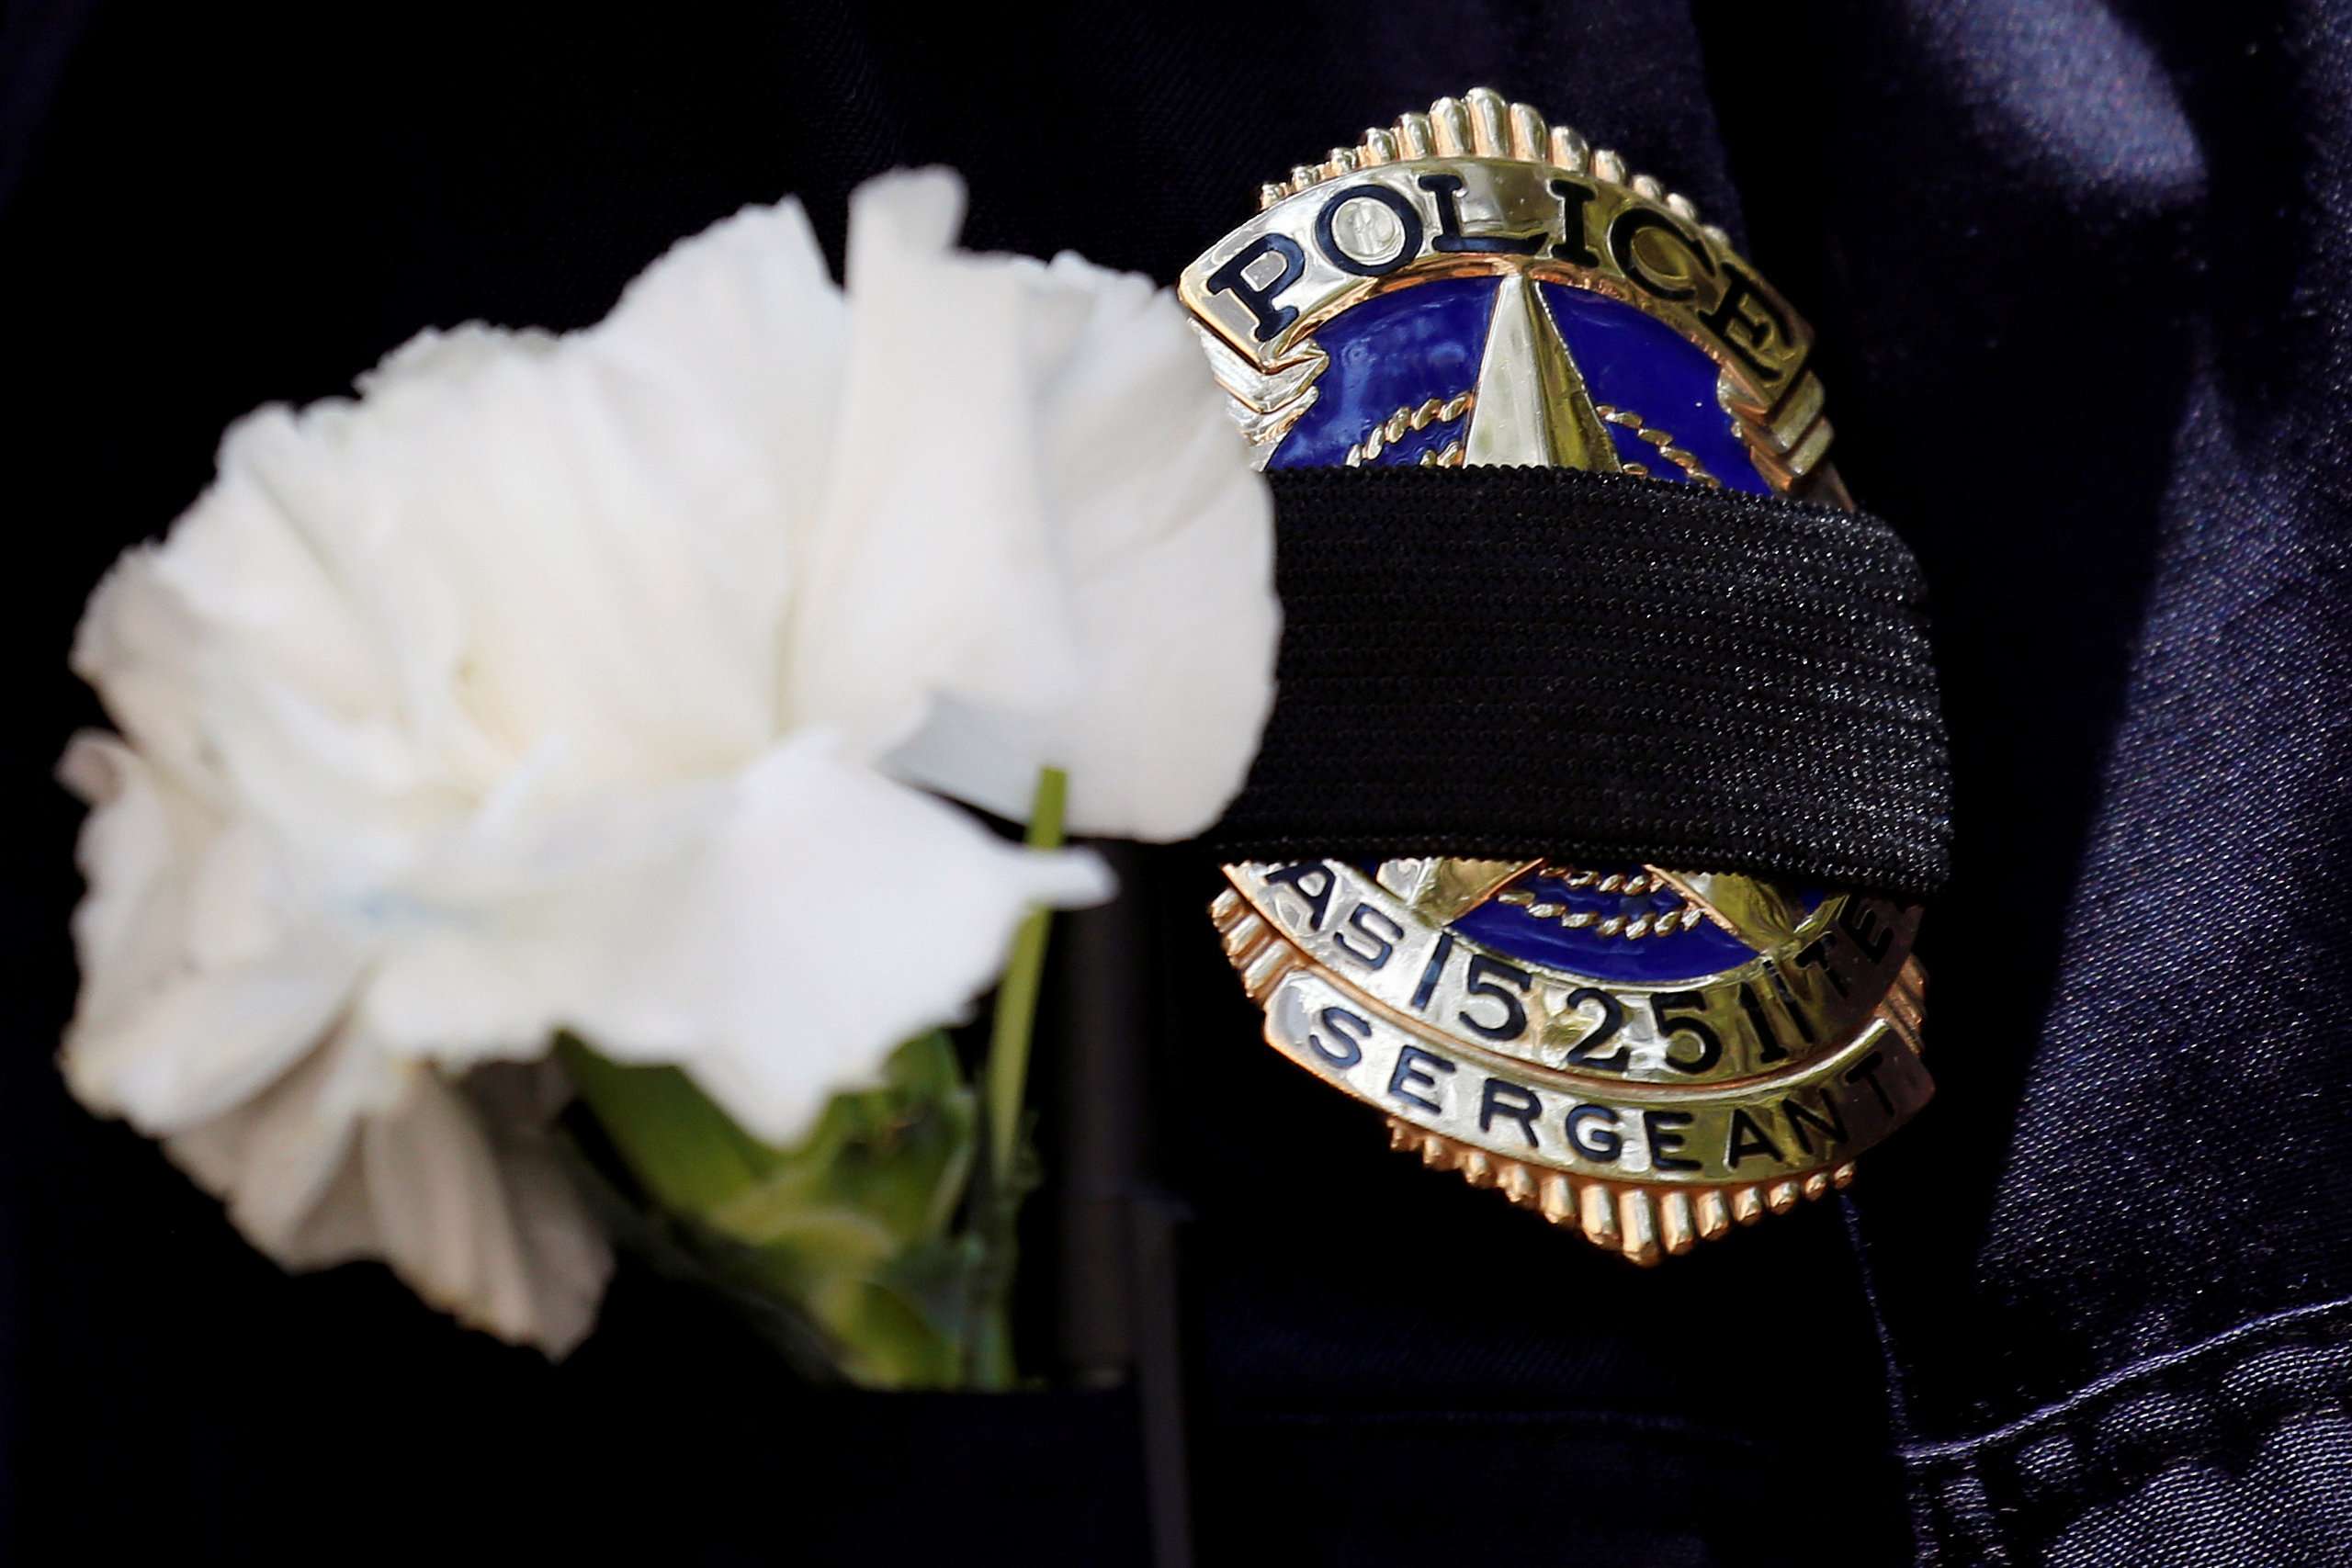 A Dallas police sergeant wears a mourning band and flower on his badge during a prayer vigil, one day after a lone gunman ambushed and killed five police officers at a protest decrying police shootings of black men, in Dallas, Texas, July 8, 2016. Photo: Reuters